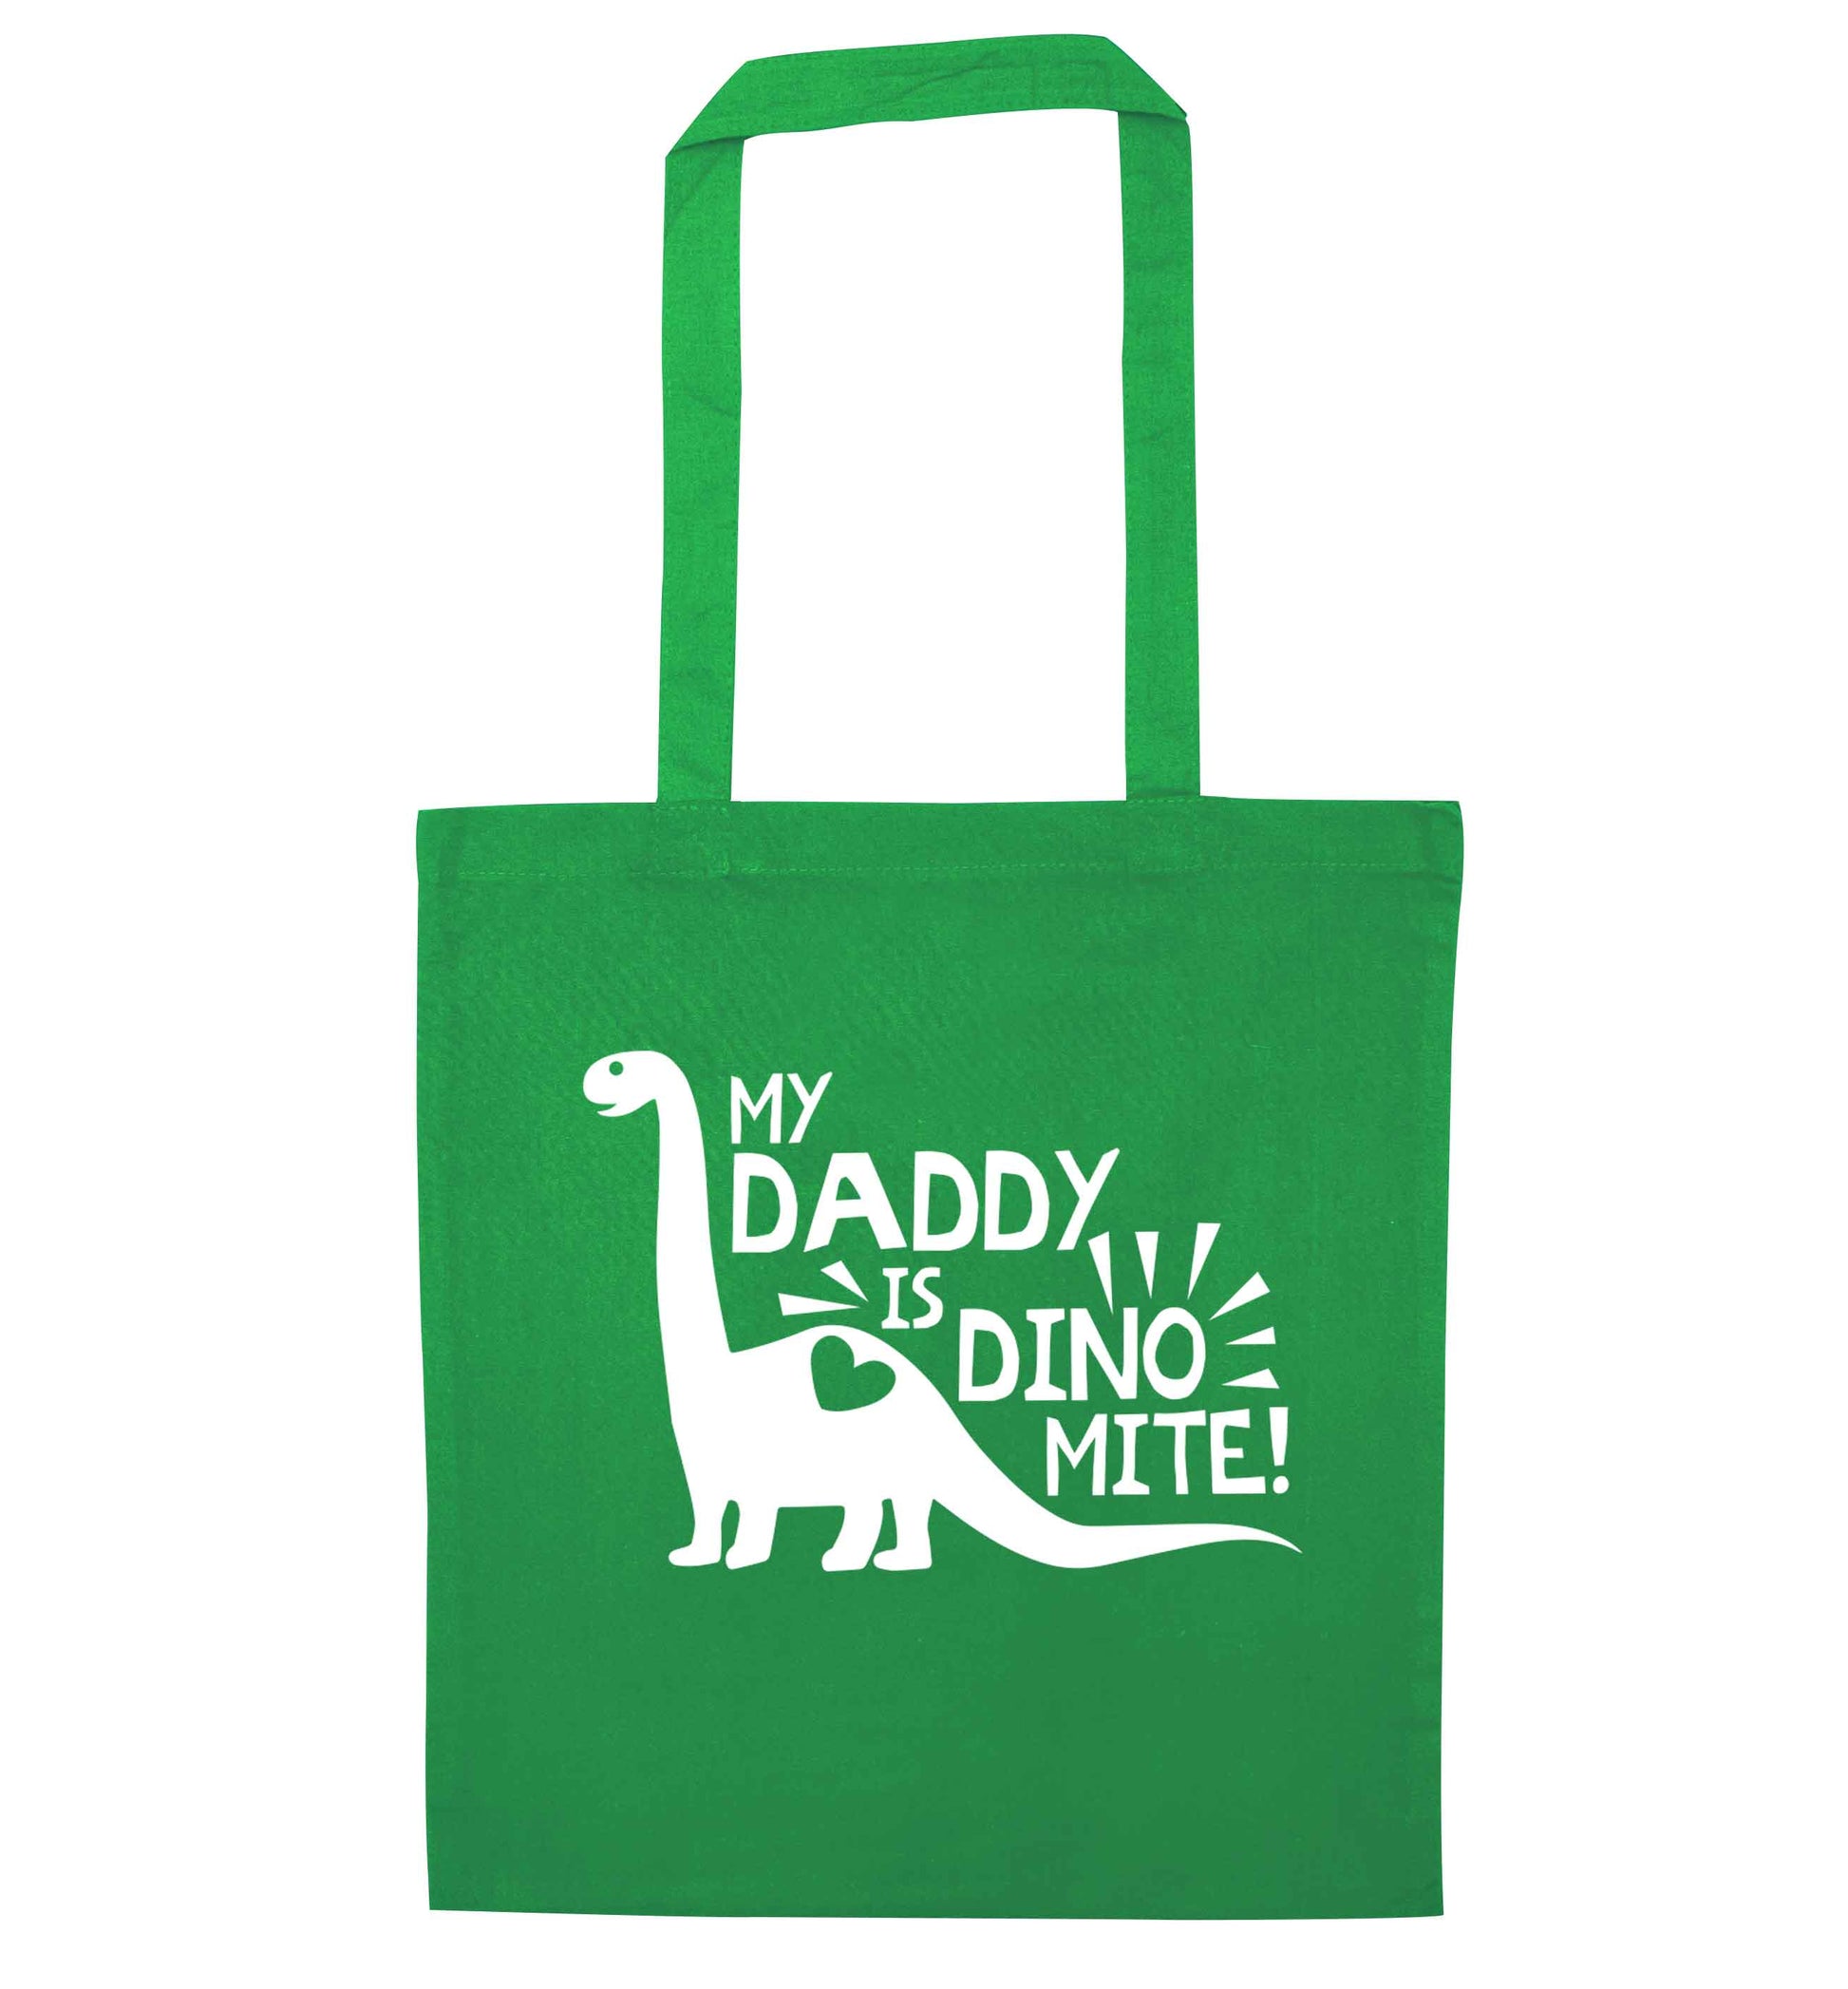 My daddy is dinomite! green tote bag